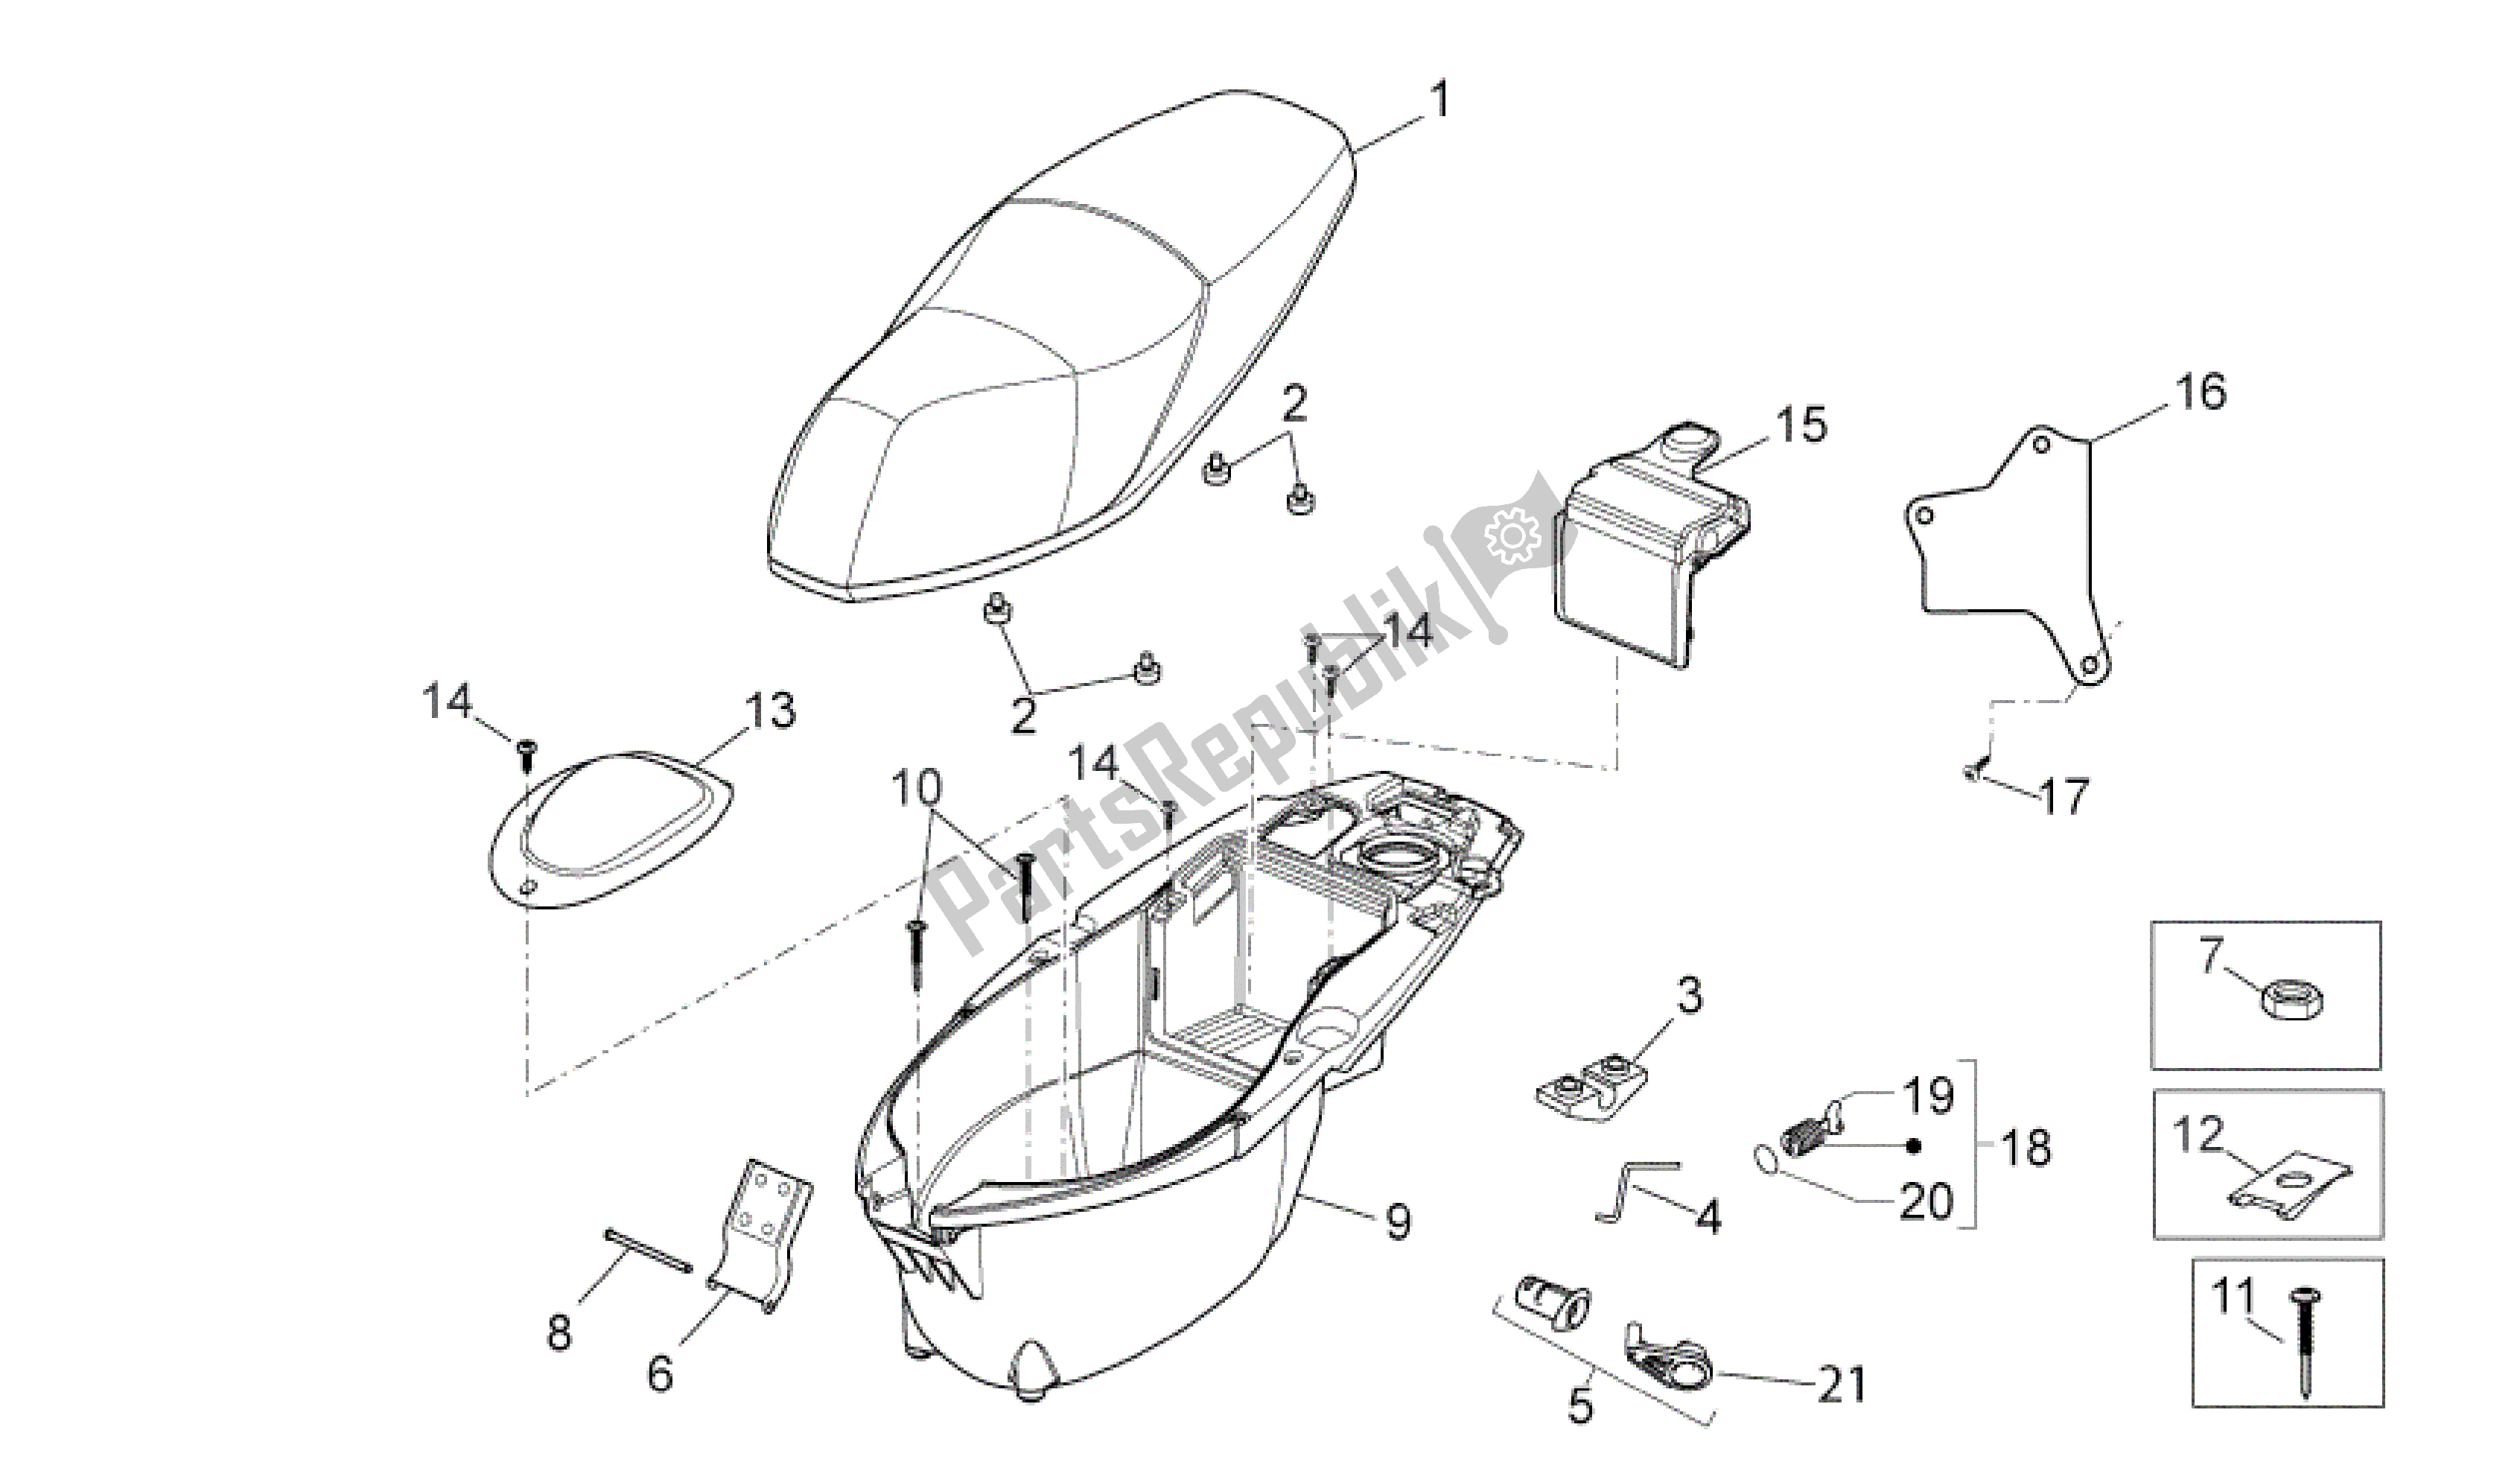 All parts for the Central Body Iii of the Aprilia Sport City 50 2011